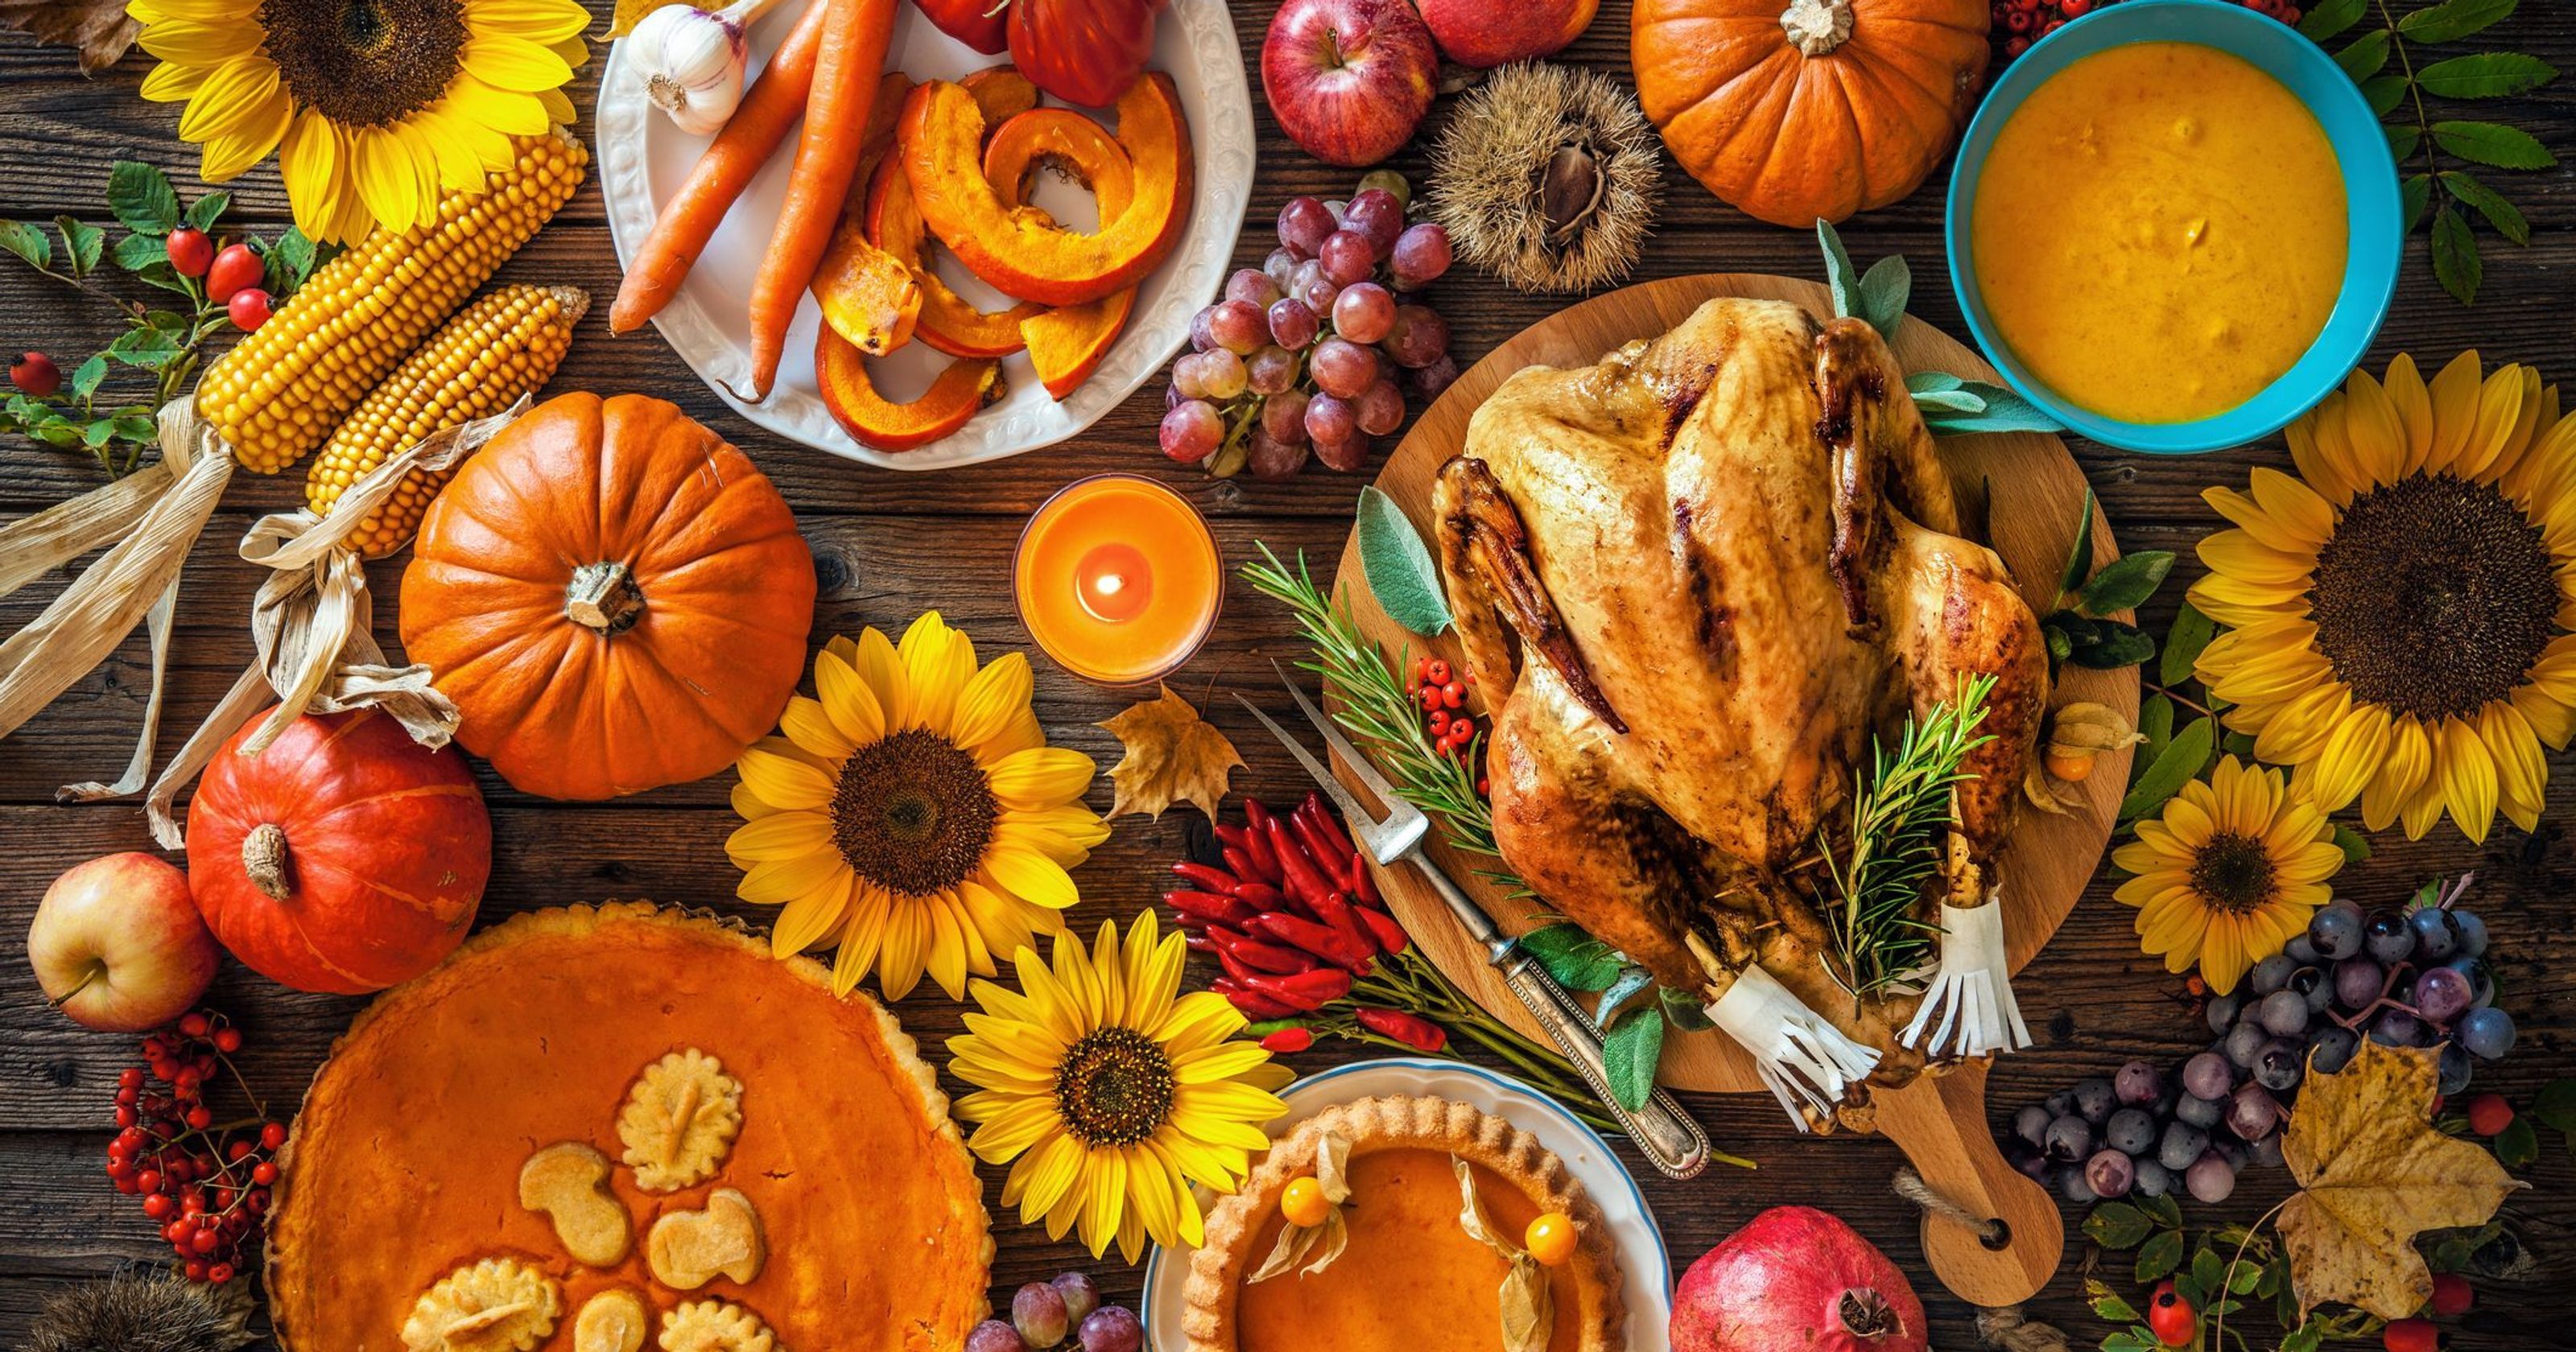 Image result for thanksgiving pictures"